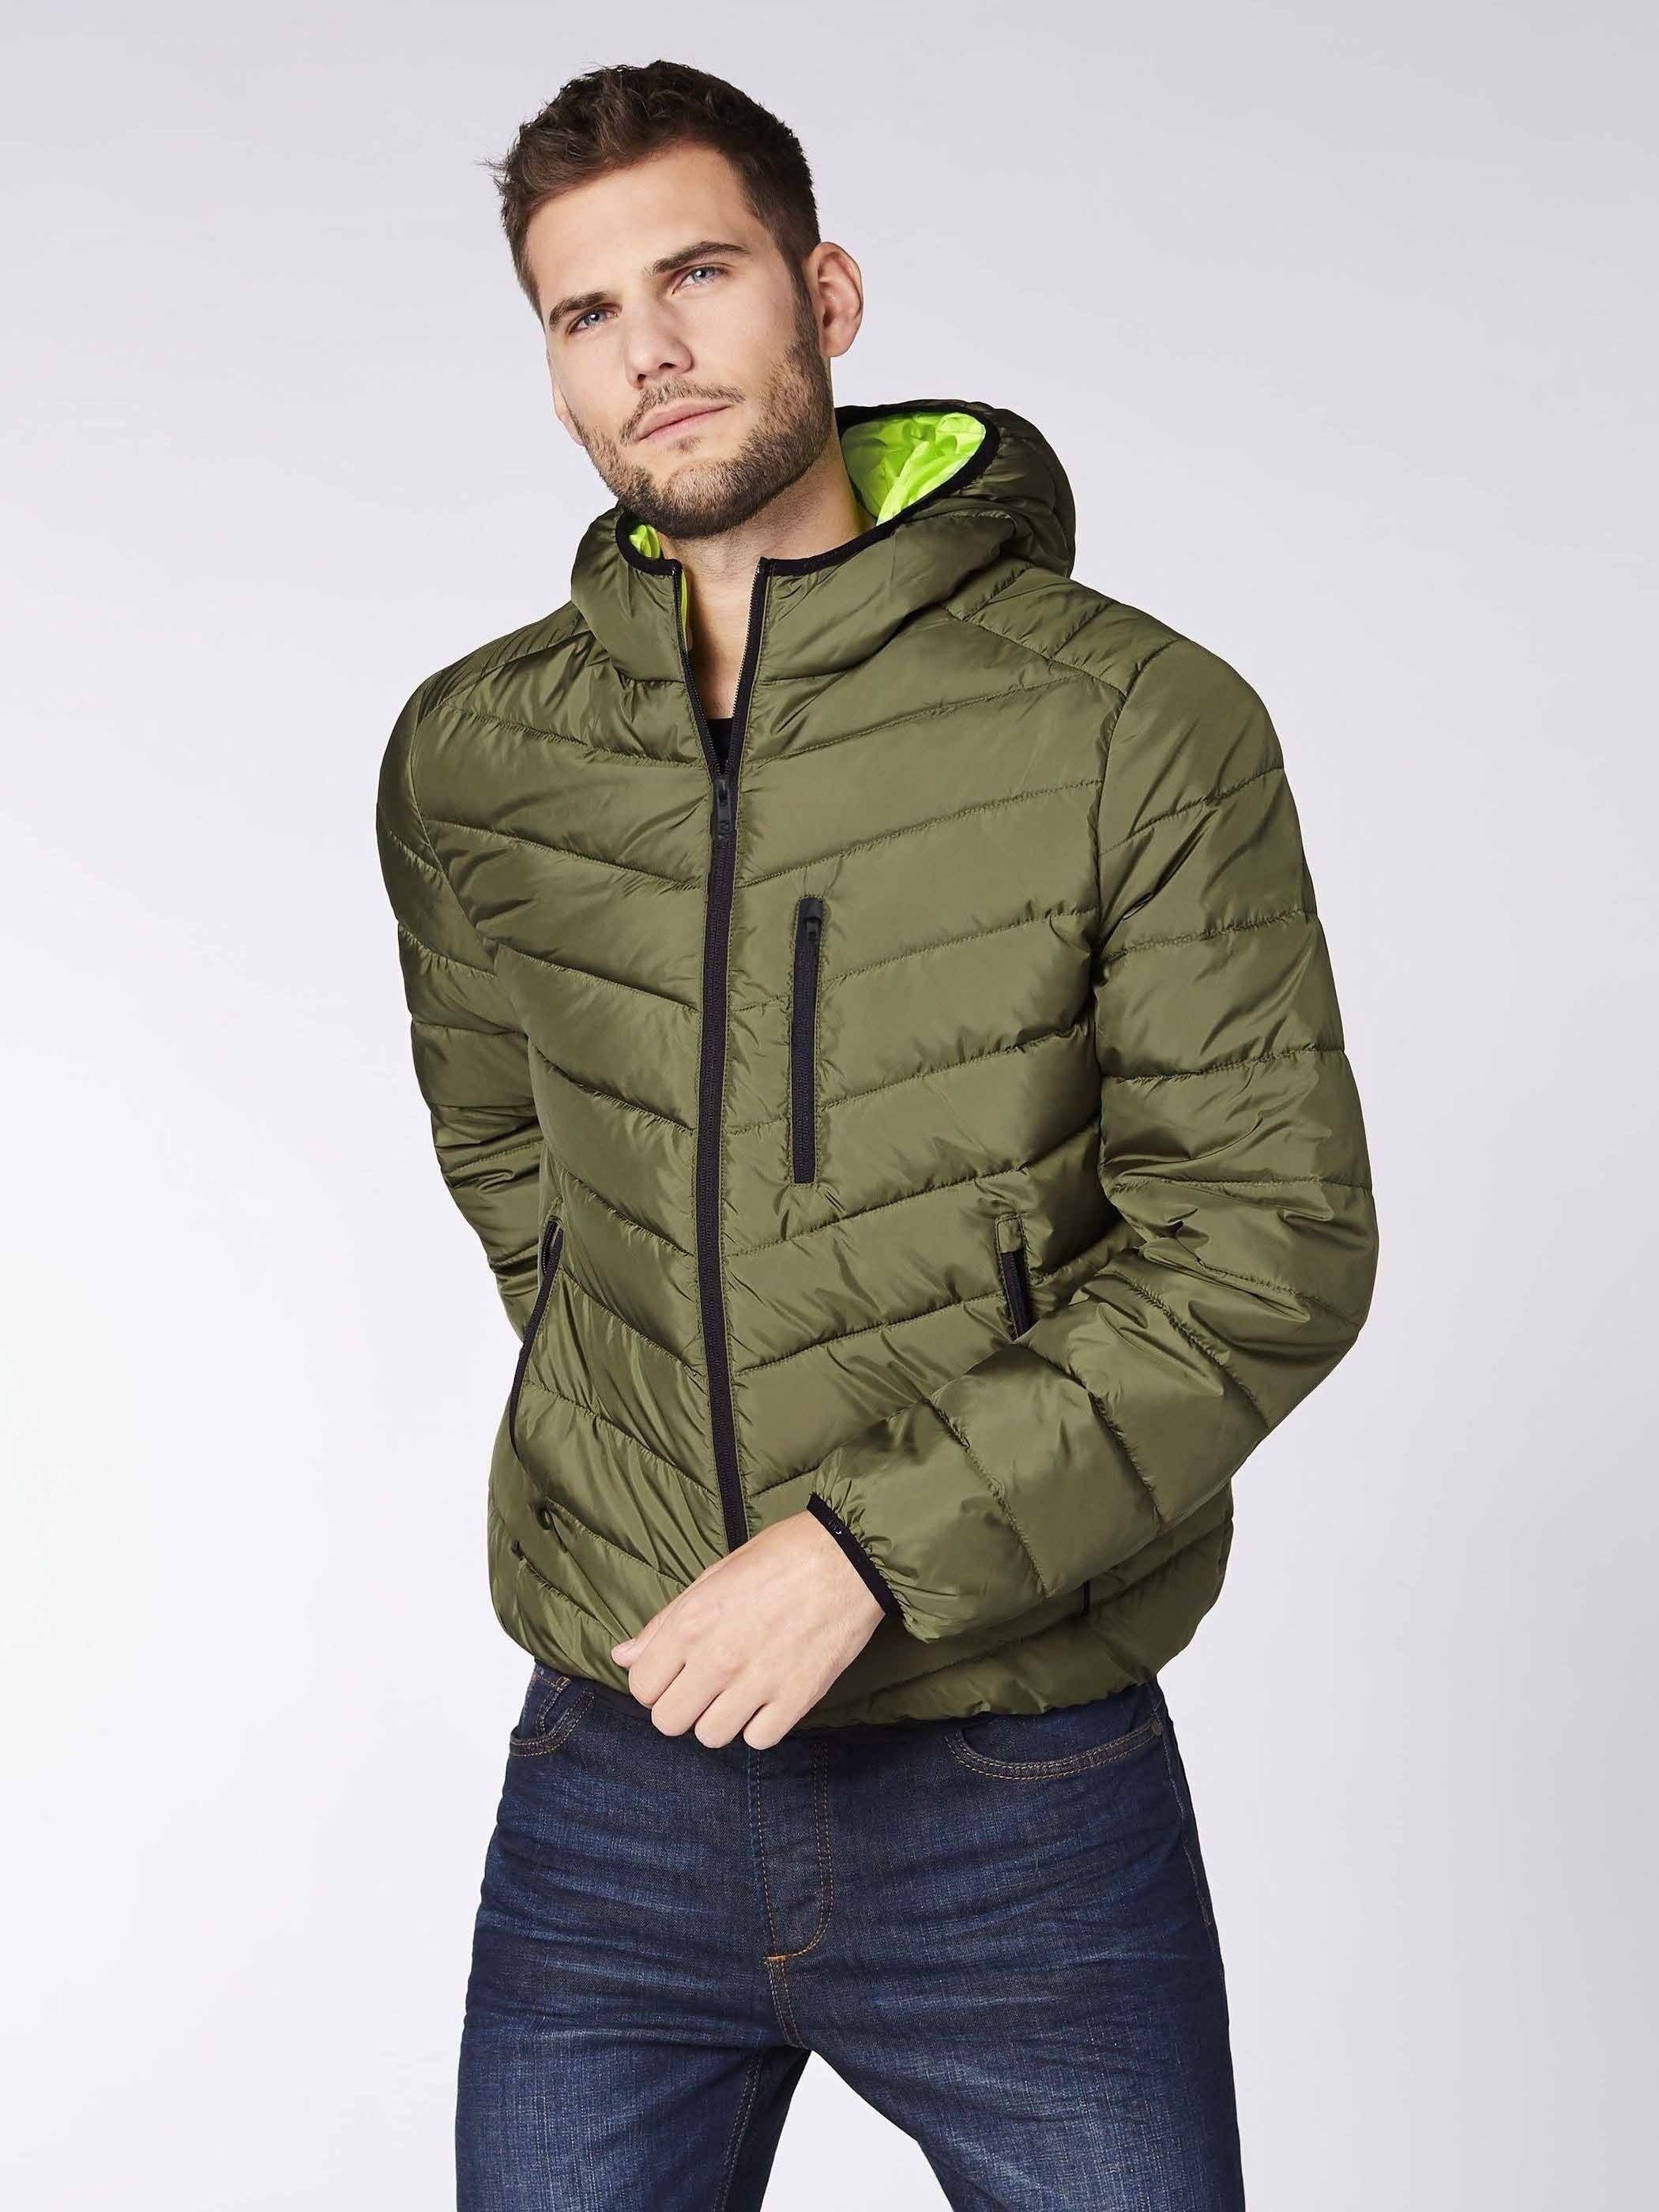 TACVASEN Men's Cargo Jackets-Casual Winter Warm Cotton Fleece Lined Solid  Snaps Military Outerwear Army Green S at  Men's Clothing store